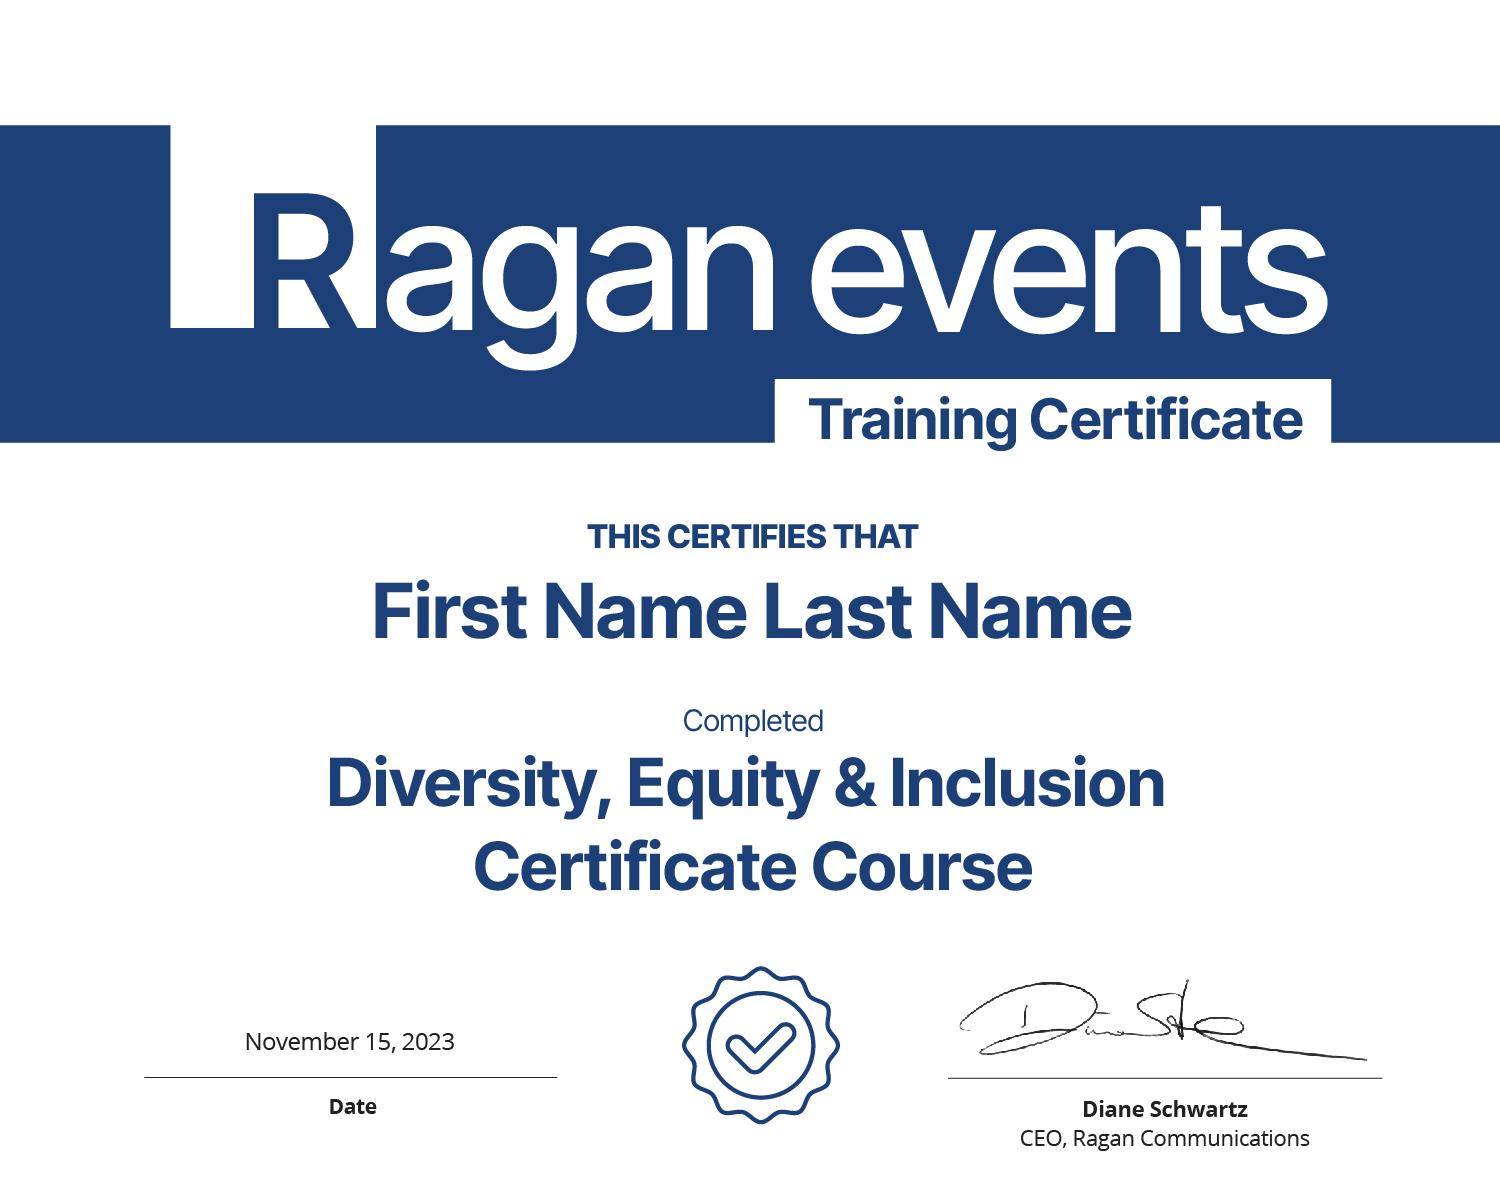 Diversity, Equity & Inclusion Certificate Course for Communicators Certificate